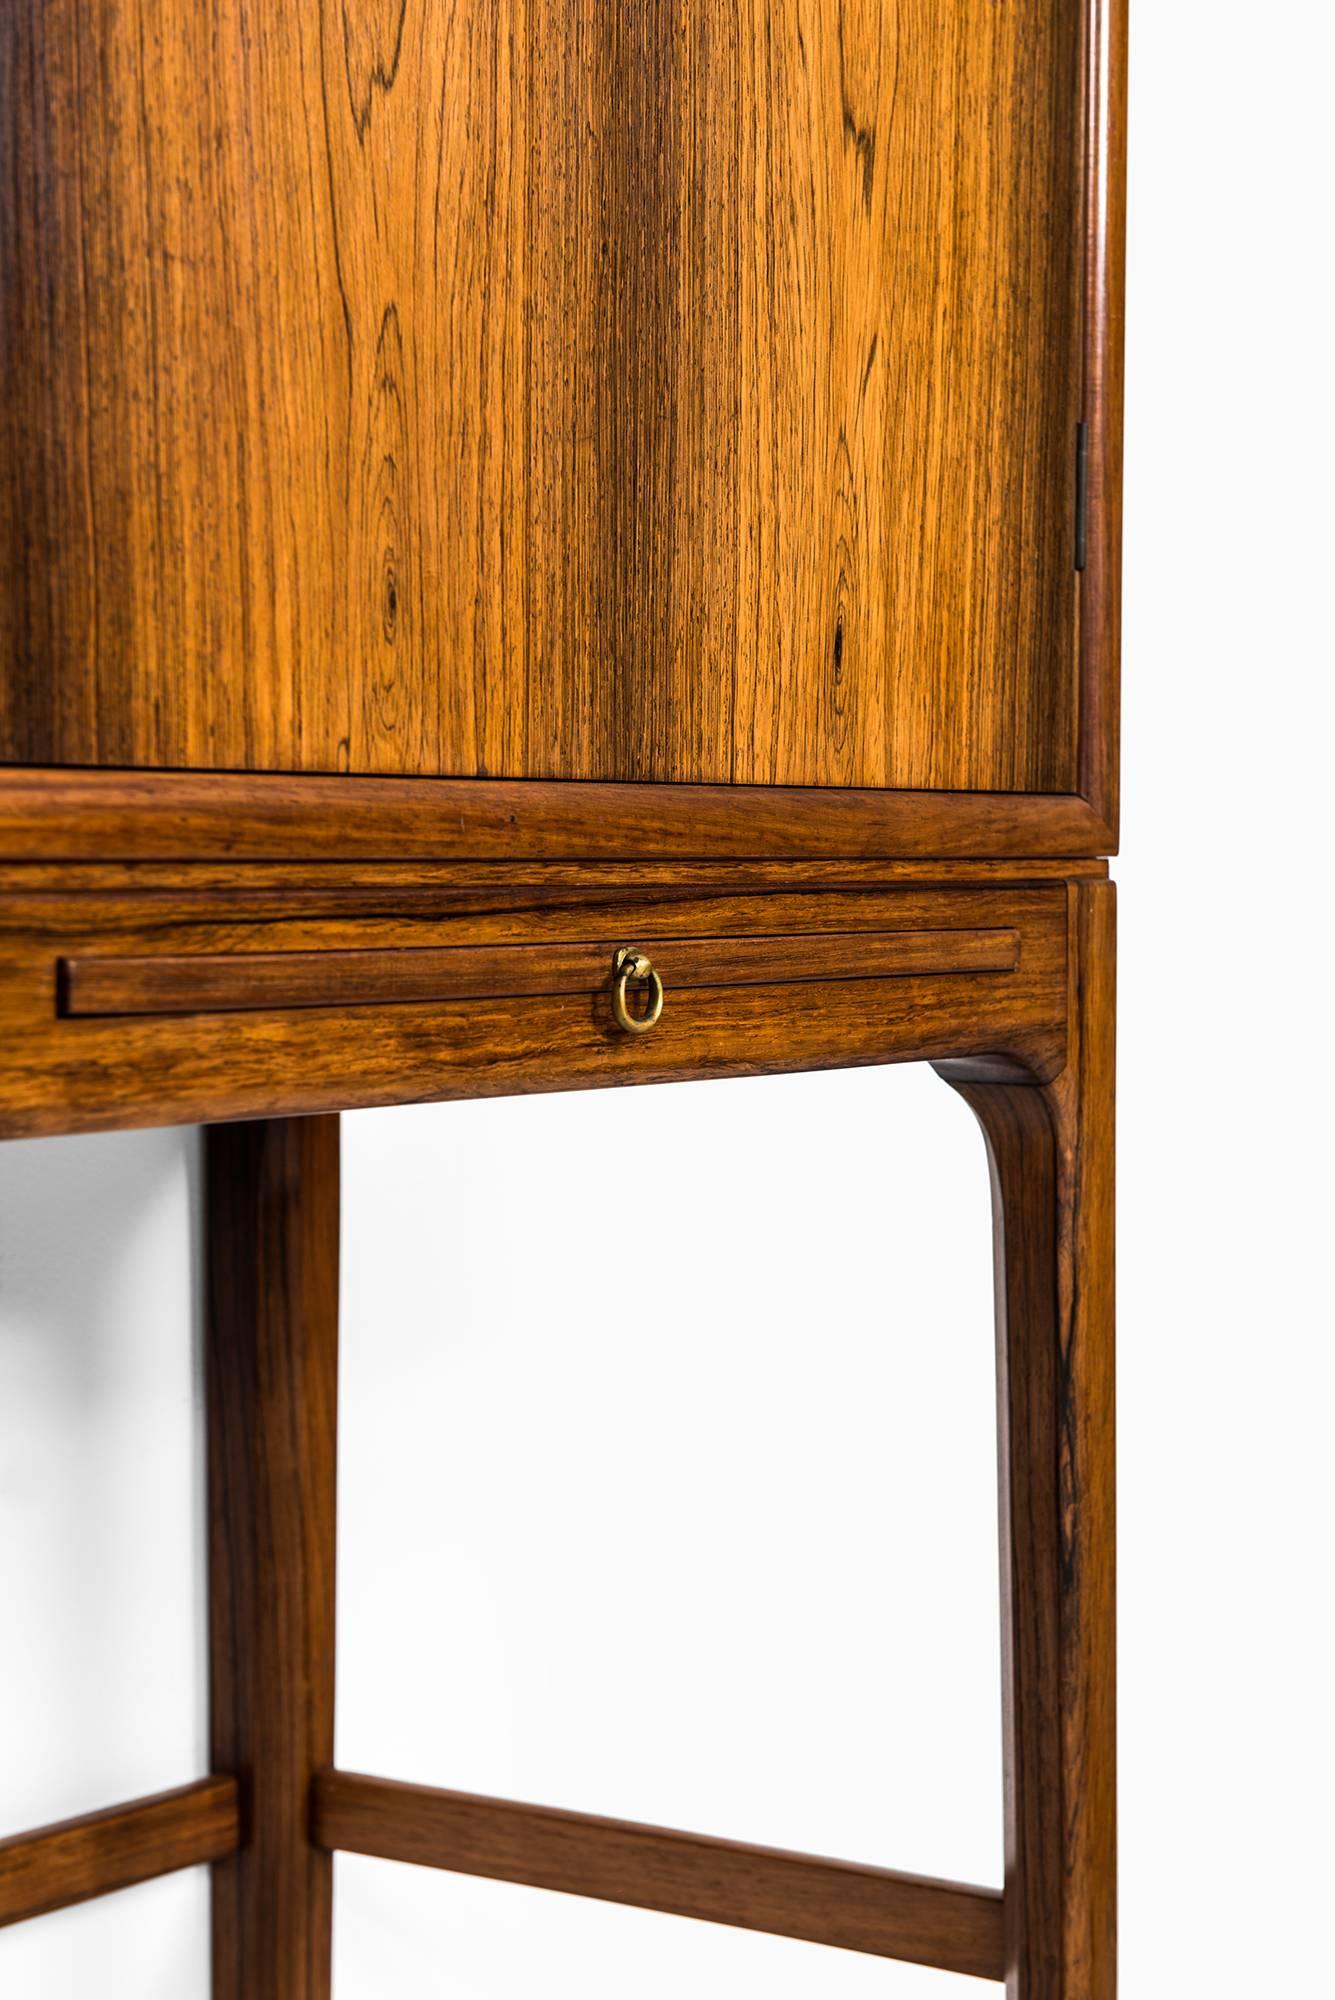 Rare cabinet in rosewood designed by Ole Wanscher. Produced by cabinetmaker A.J Iversen in Denmark.